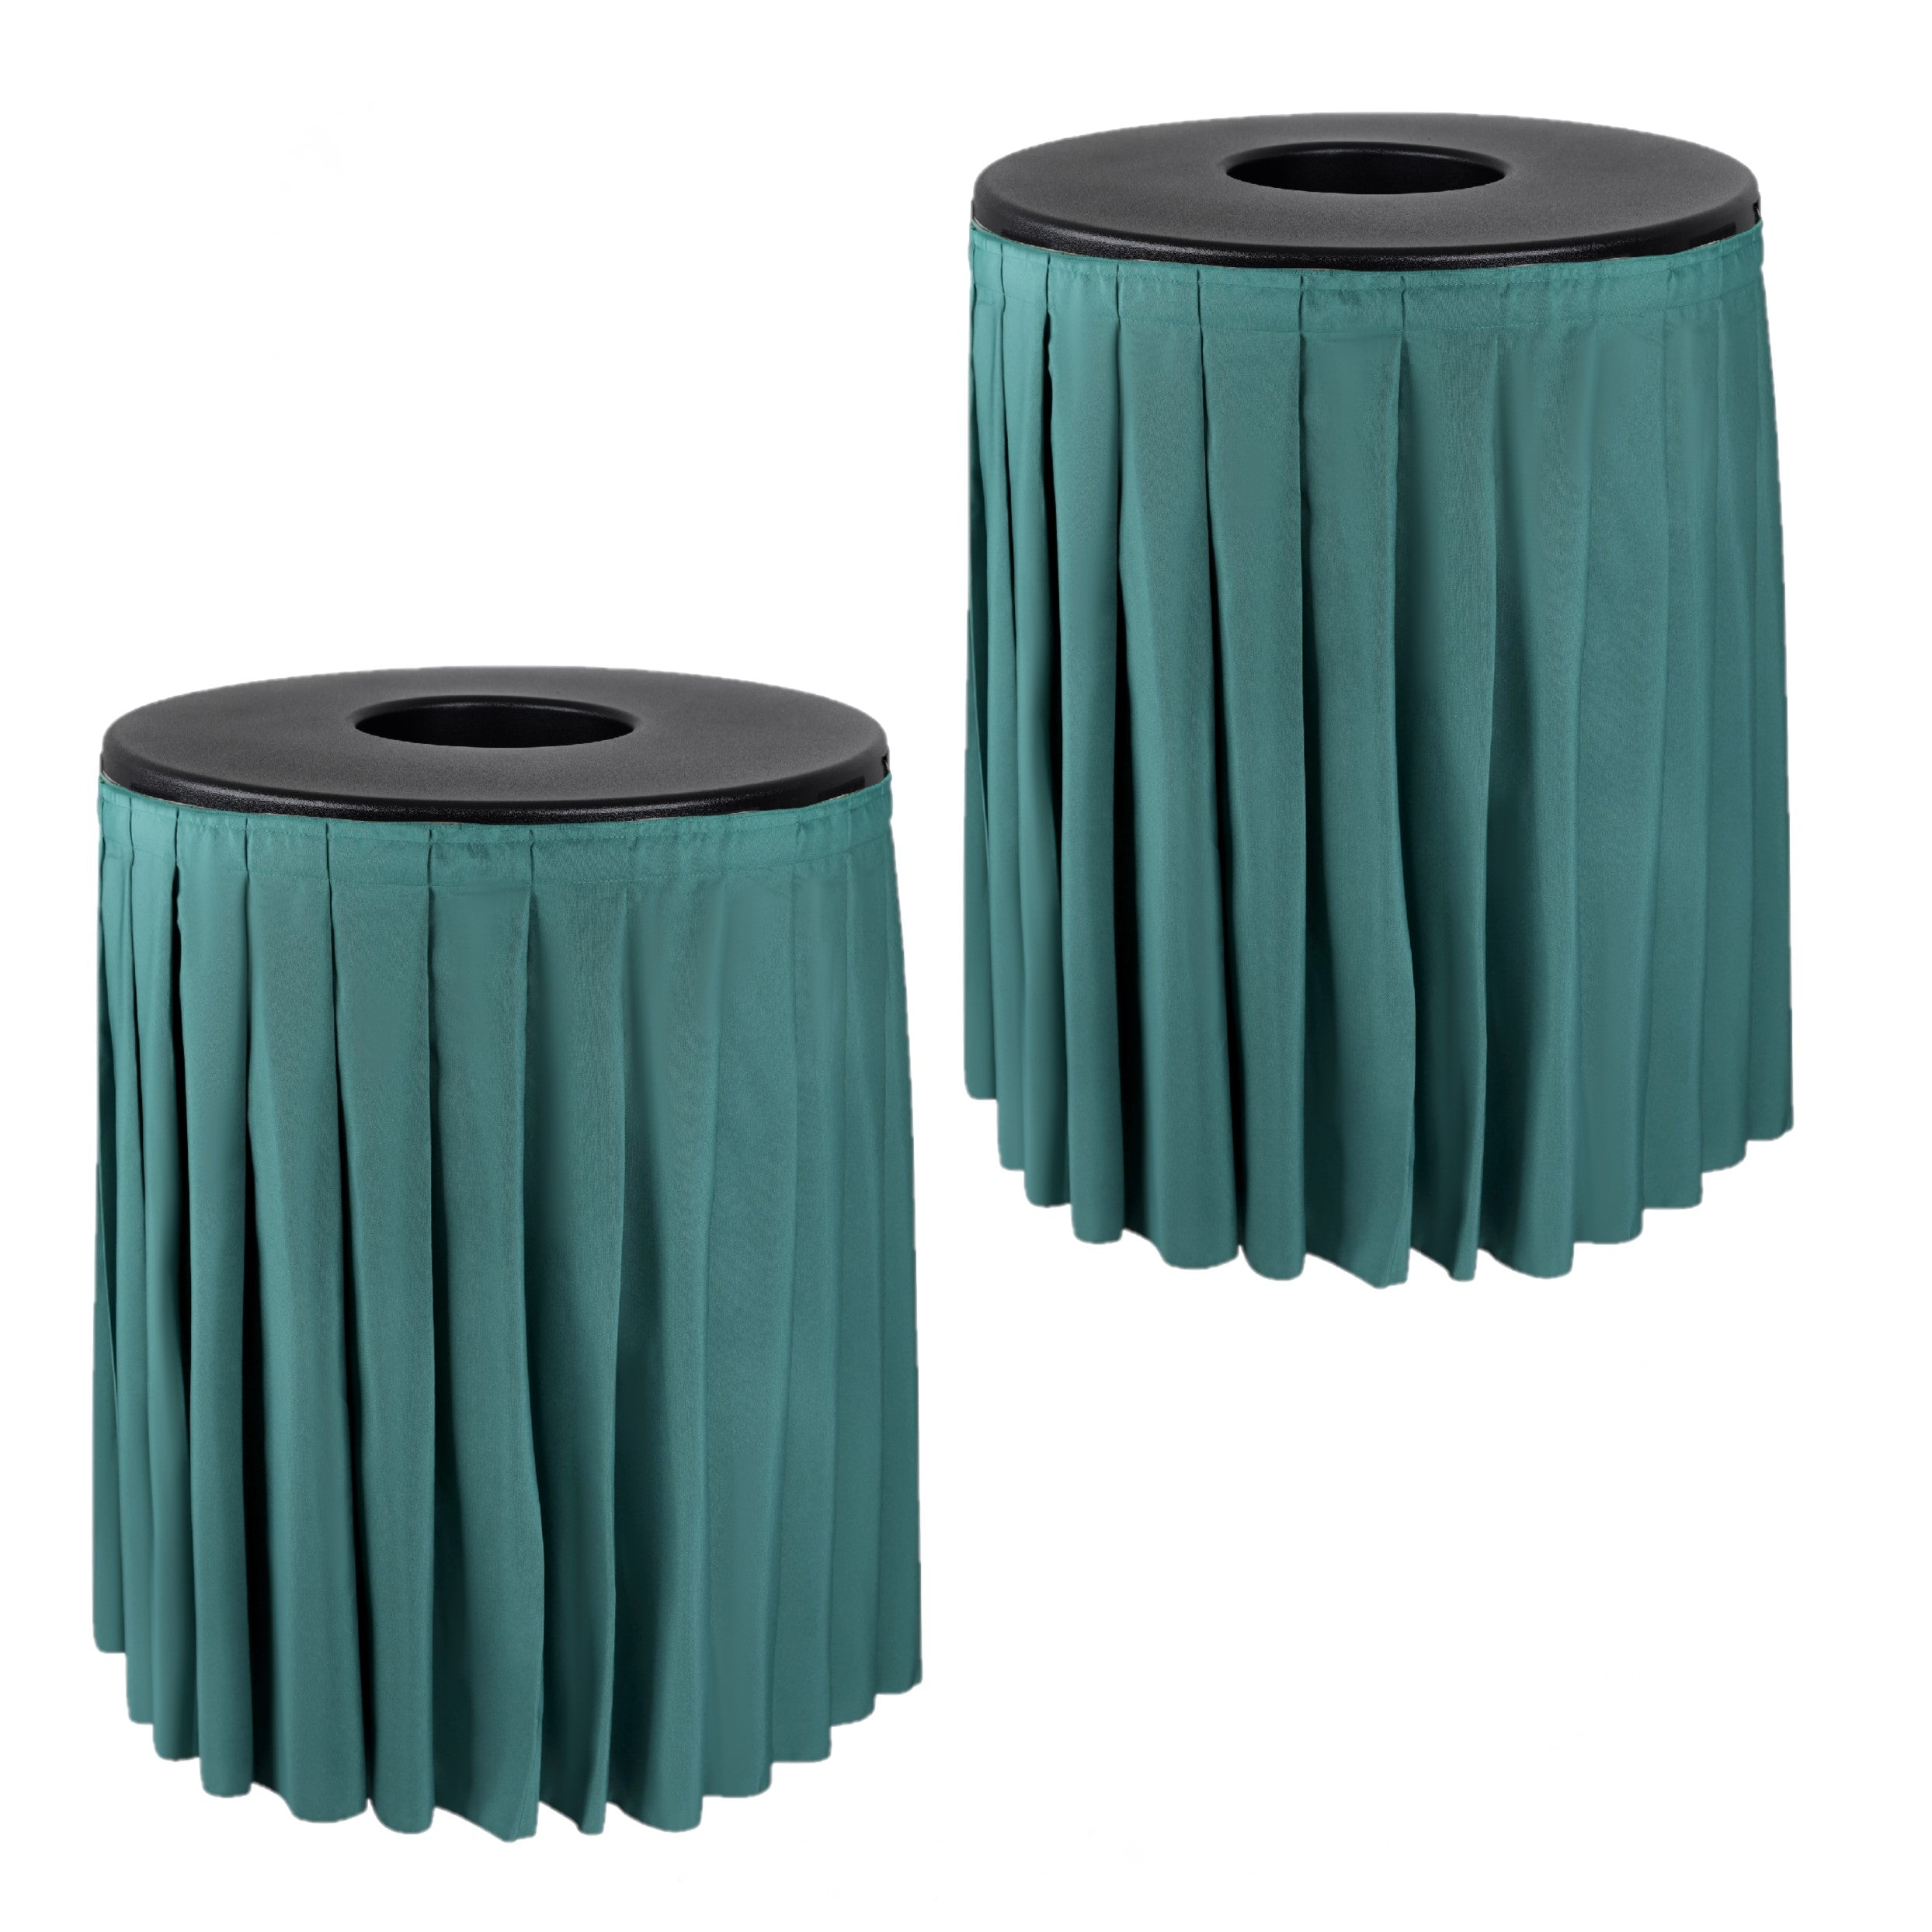 Designed to Fit 44 & 55 Gallon Trash Cans 2-PACK